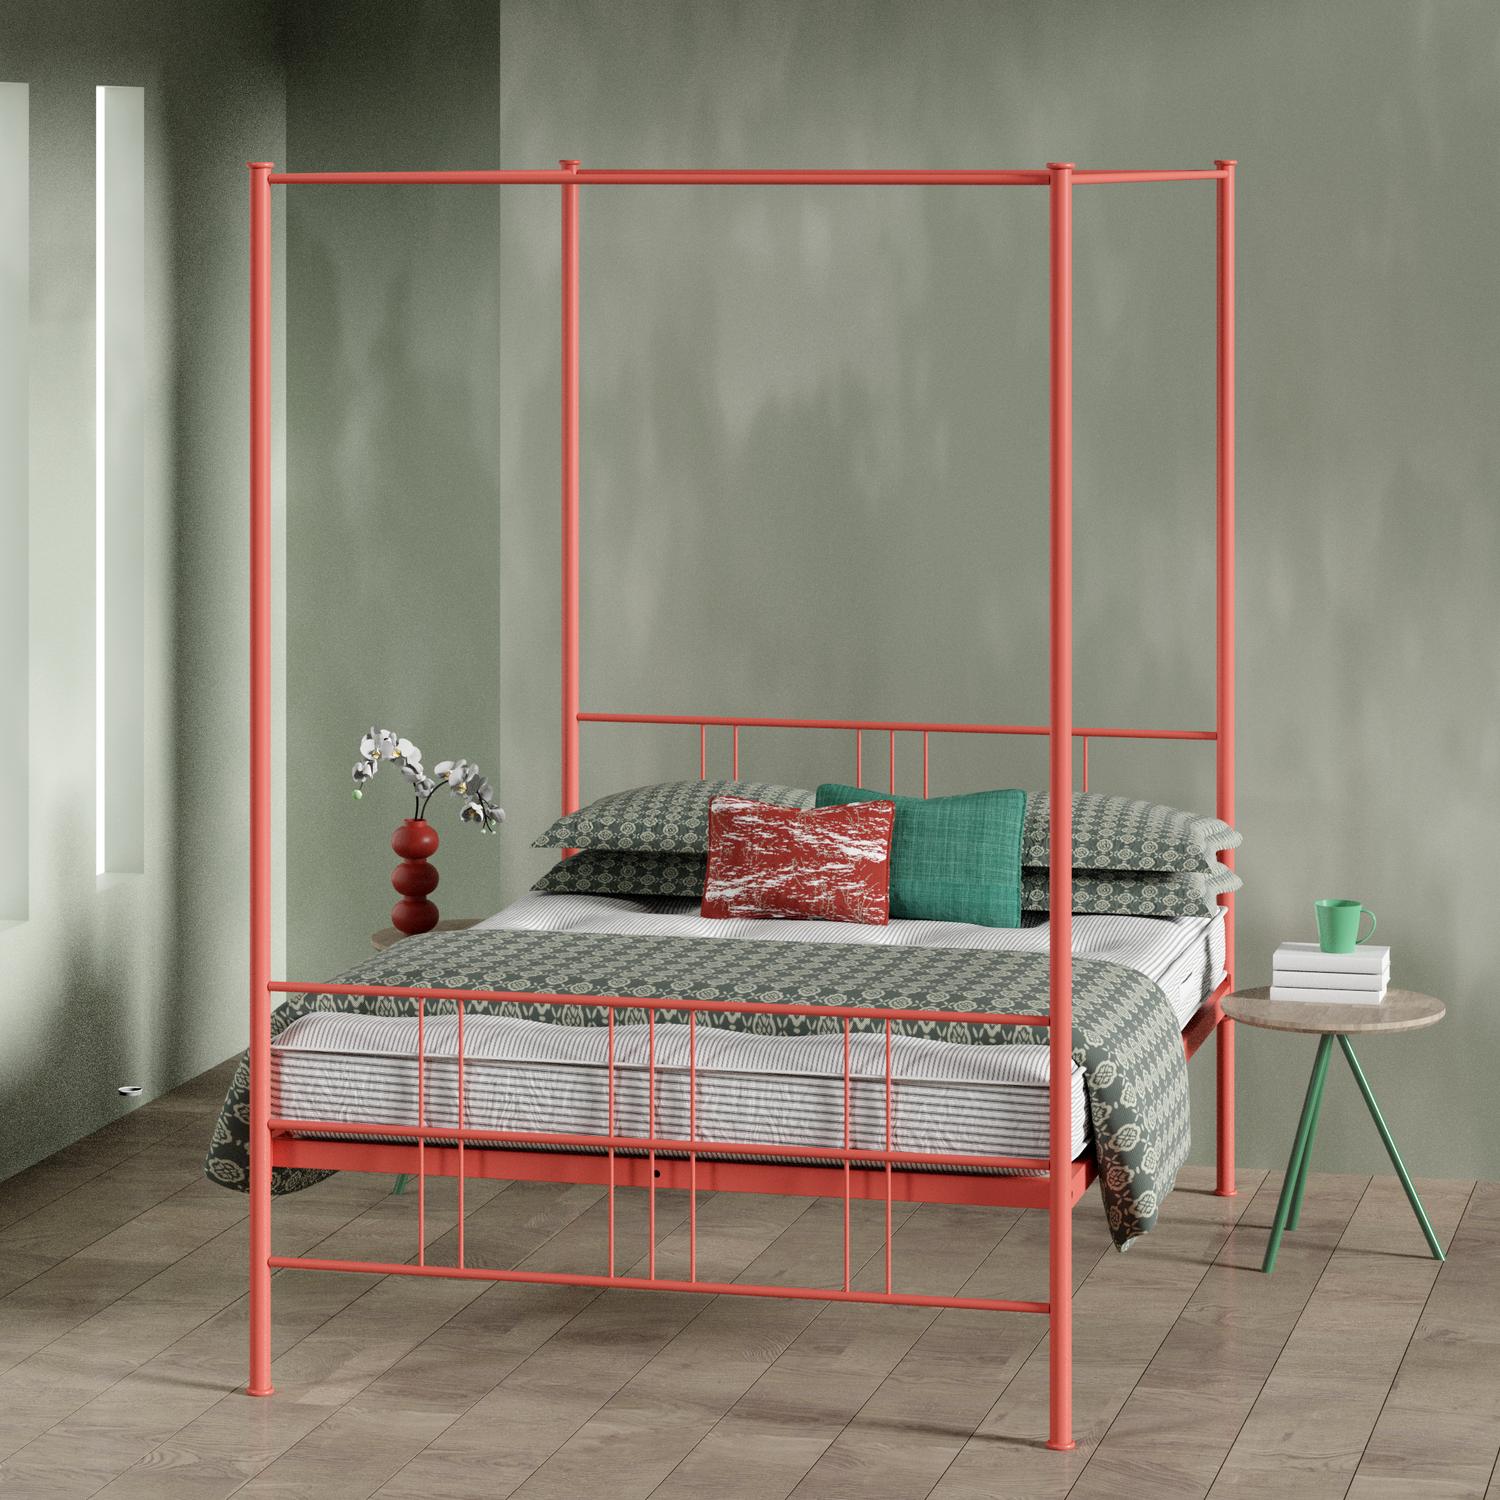 Mattress - Toulon bed frame in red